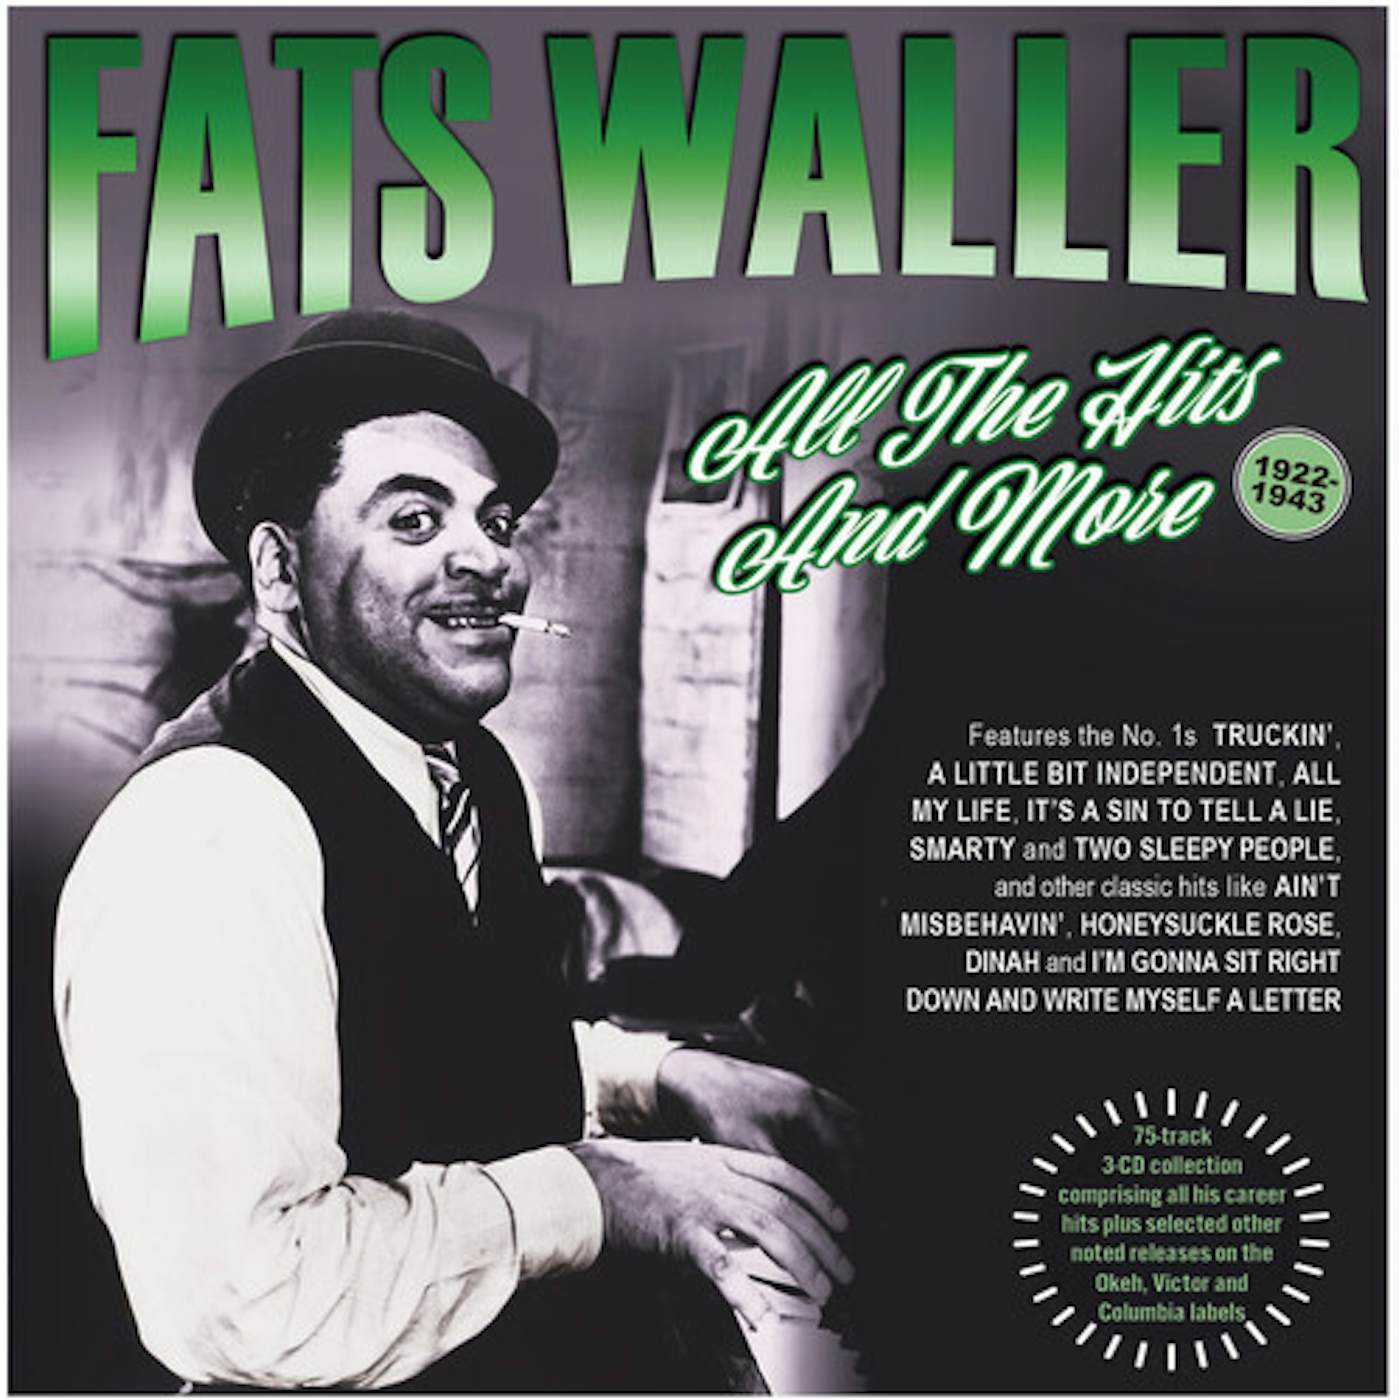 Fats Waller ALL THE HITS AND MORE 1922-43 CD